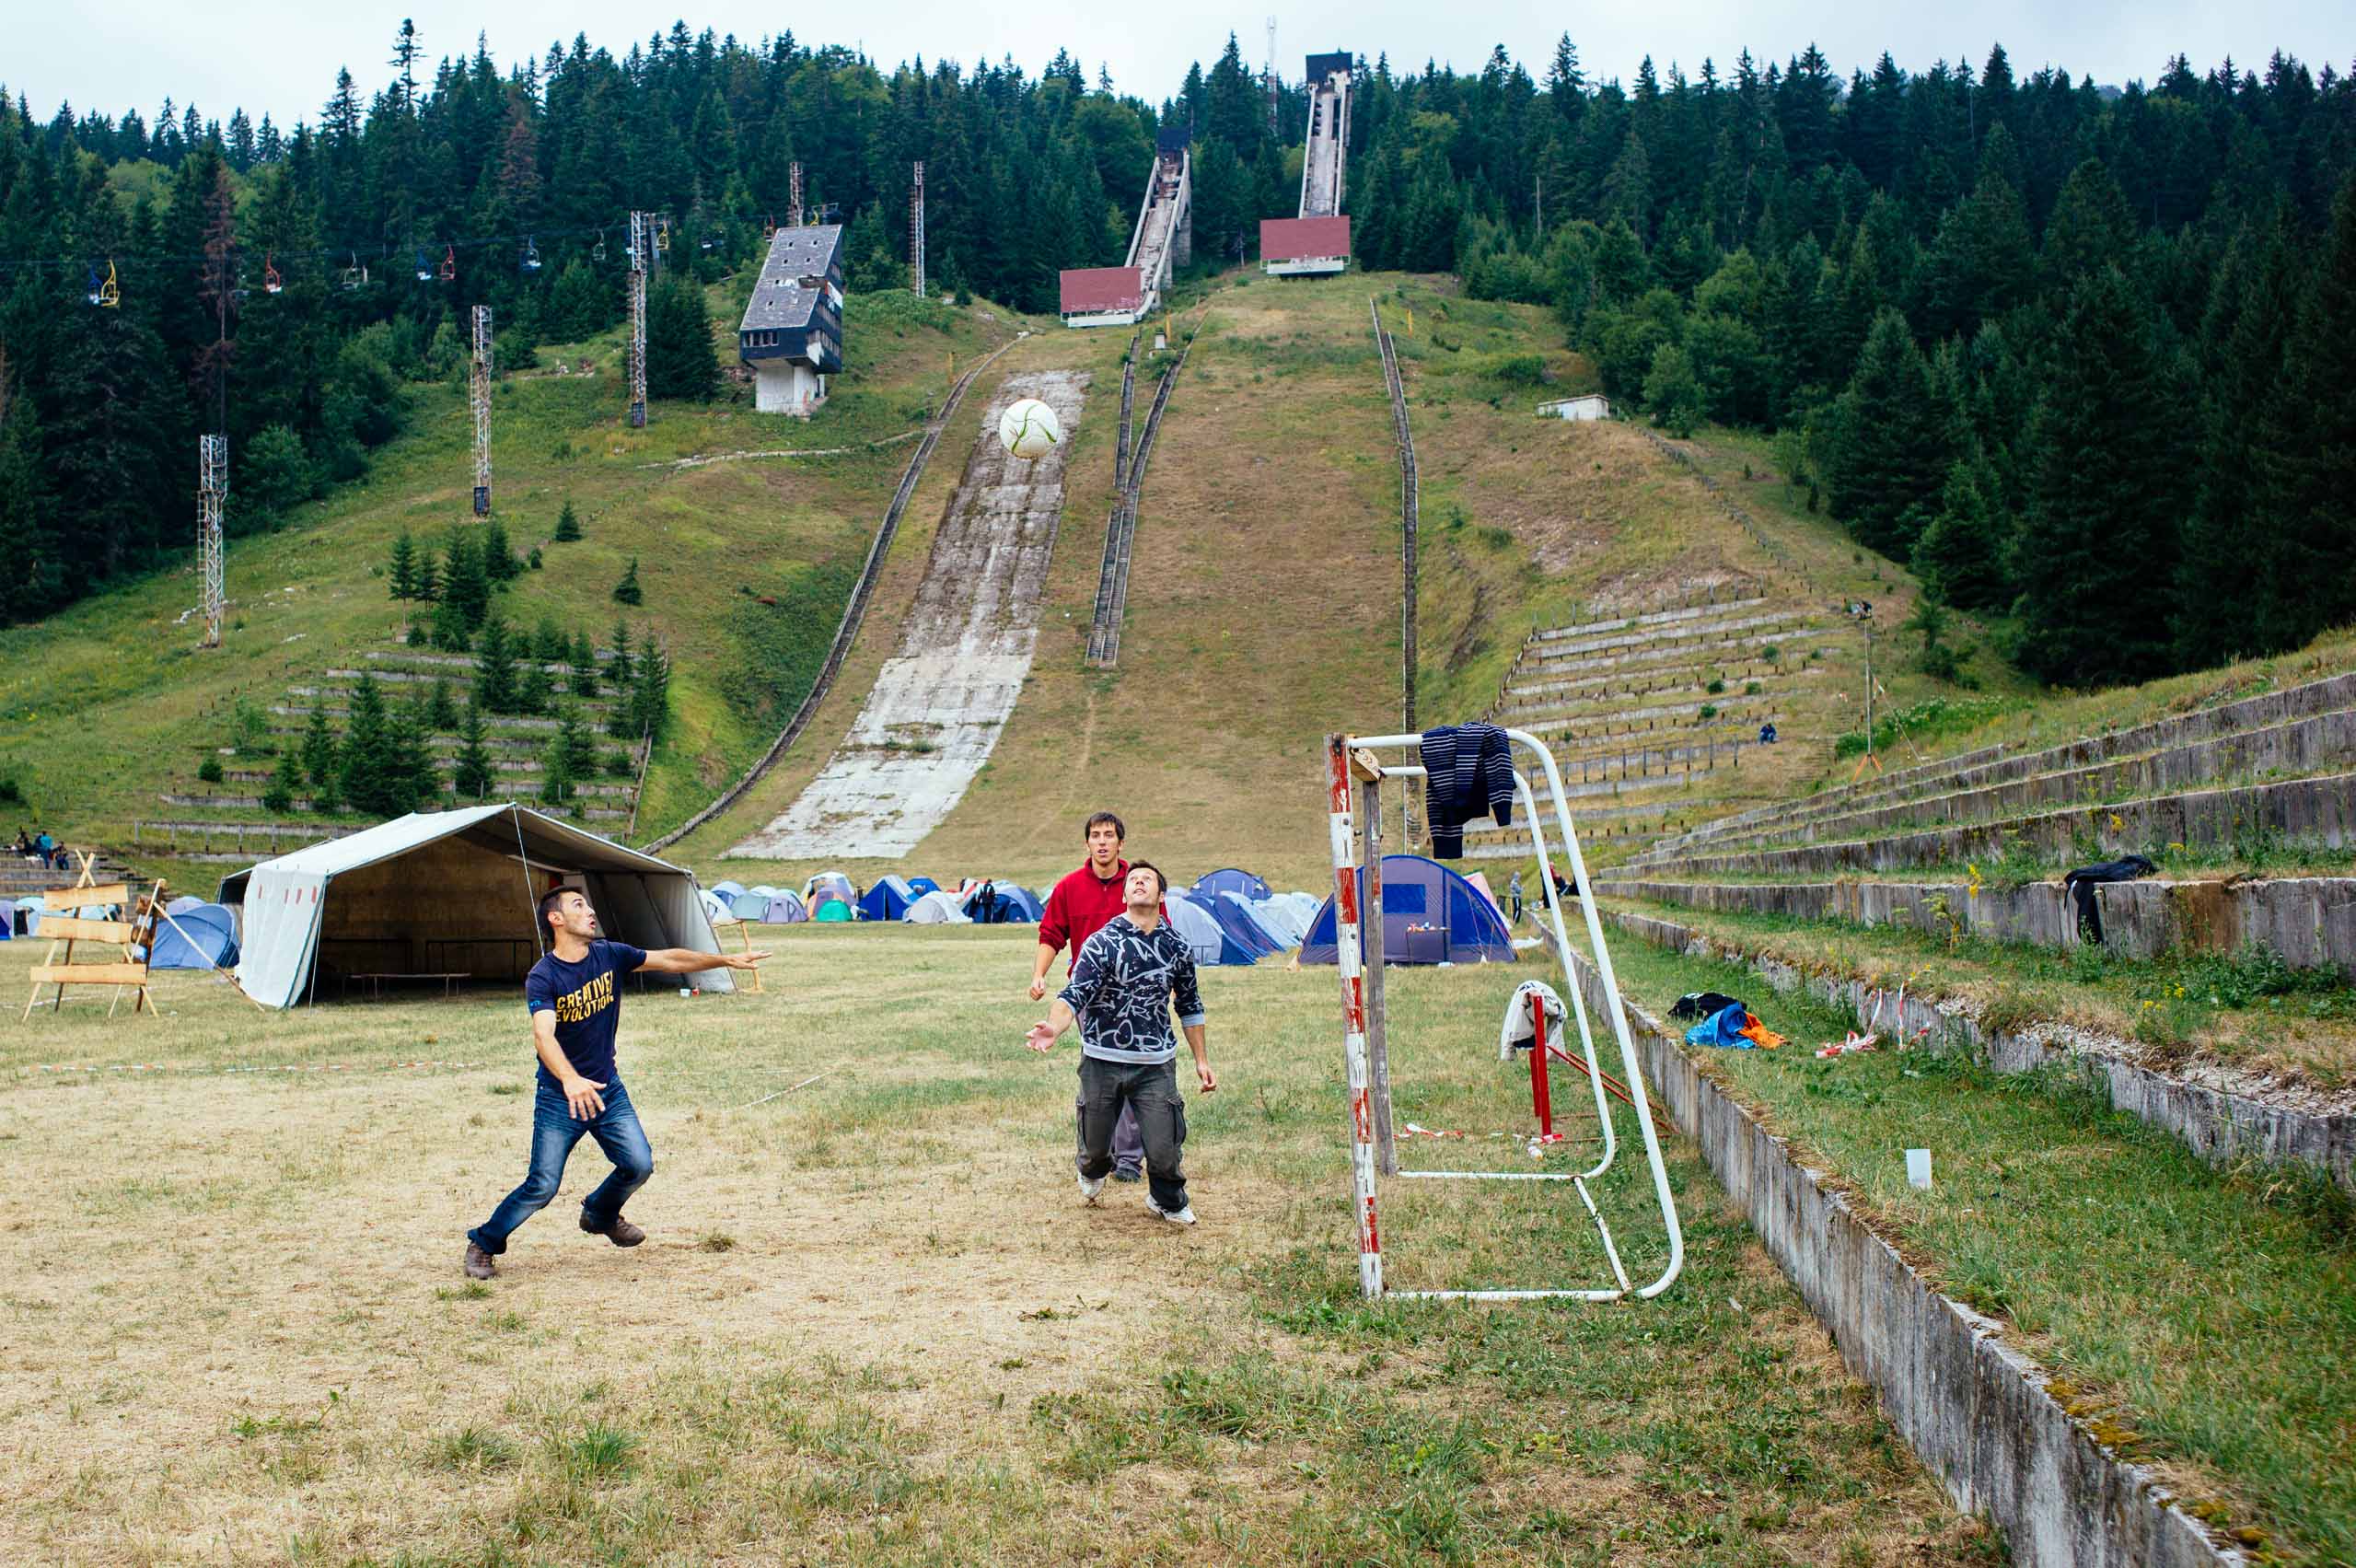 The former ski jump grounds on Igman Mountain in Sarajevo, host of the 1984 Winter Olympics, photographed in July 2012.